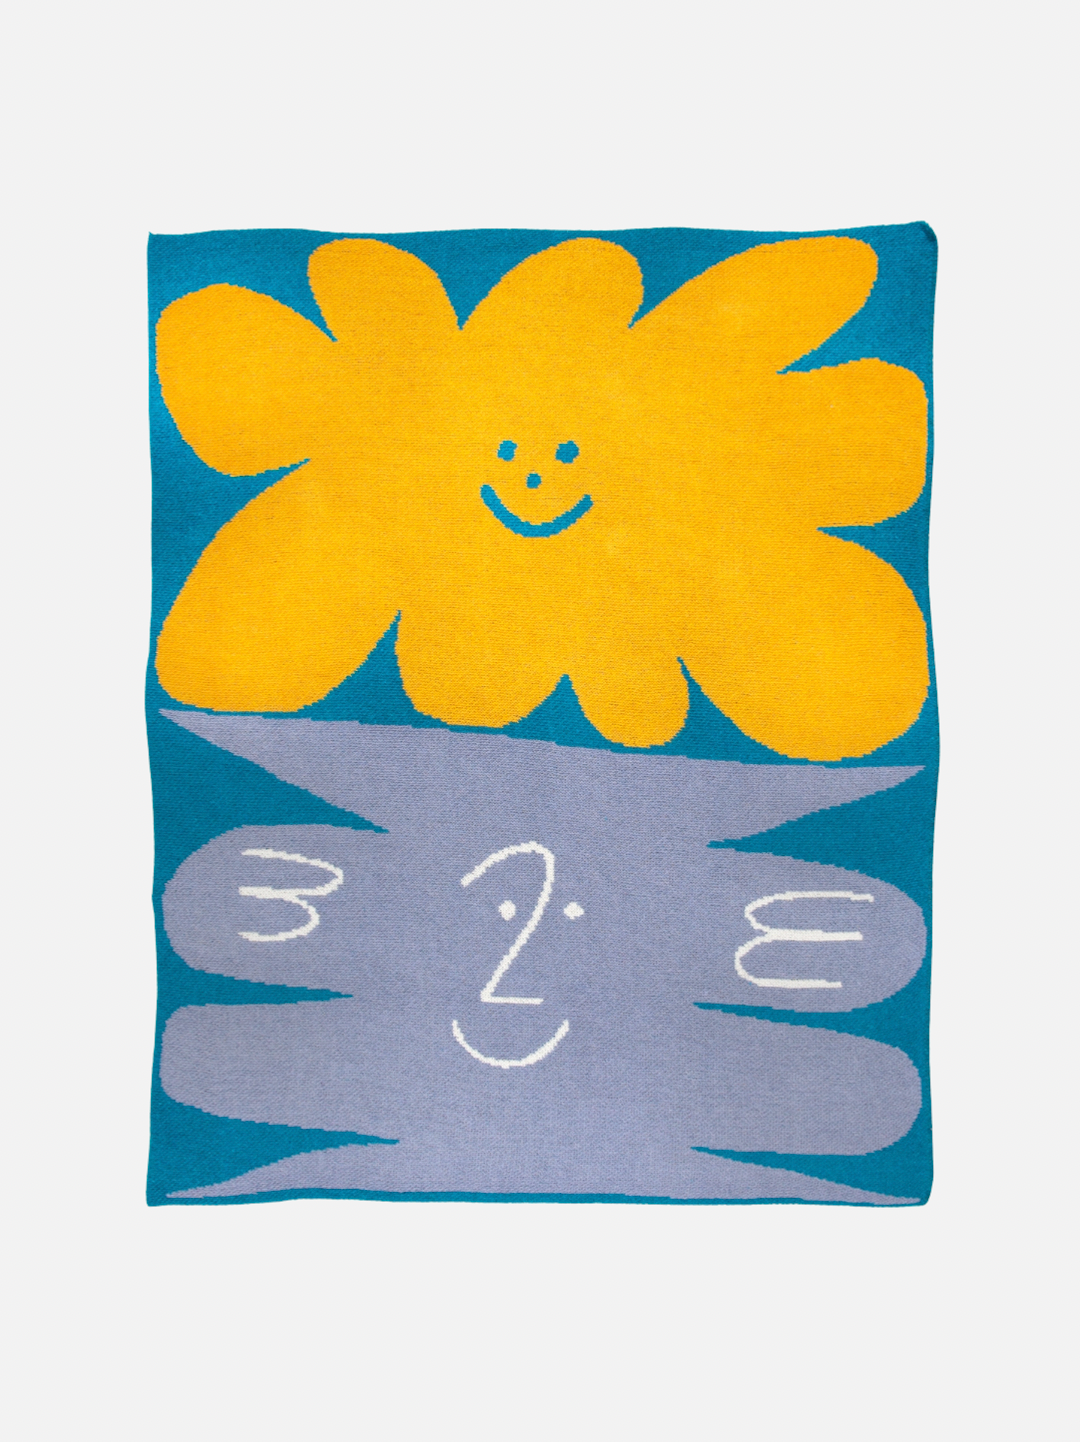 A mini blanket with yellow and gray smiley faces on a sky blue background